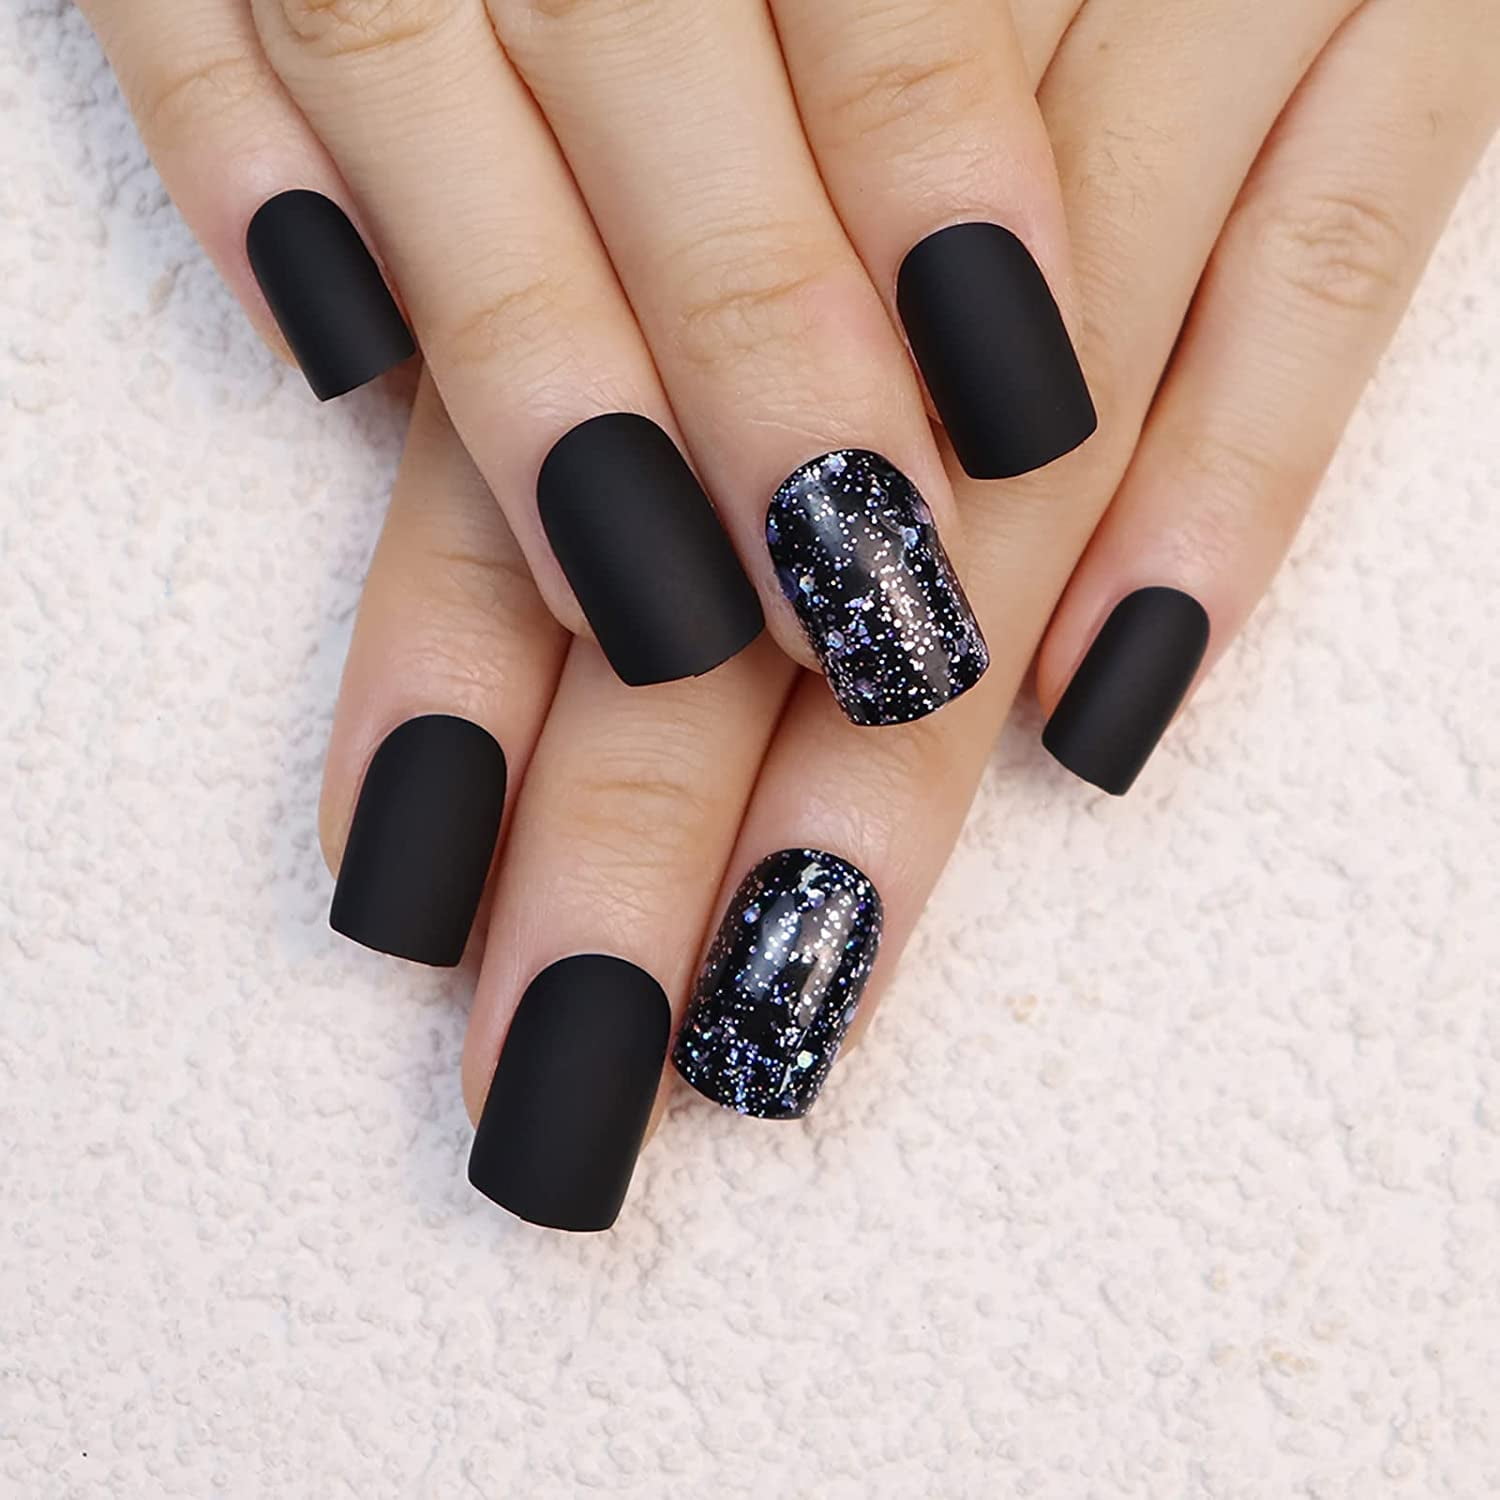 Black Glitter Press on Nails Short Nails Glue On,KQueenest Iridescent  Shimmer Acrylic Fake Nails with Salon UV Finish,Sparkling Gel Nails Press  ons